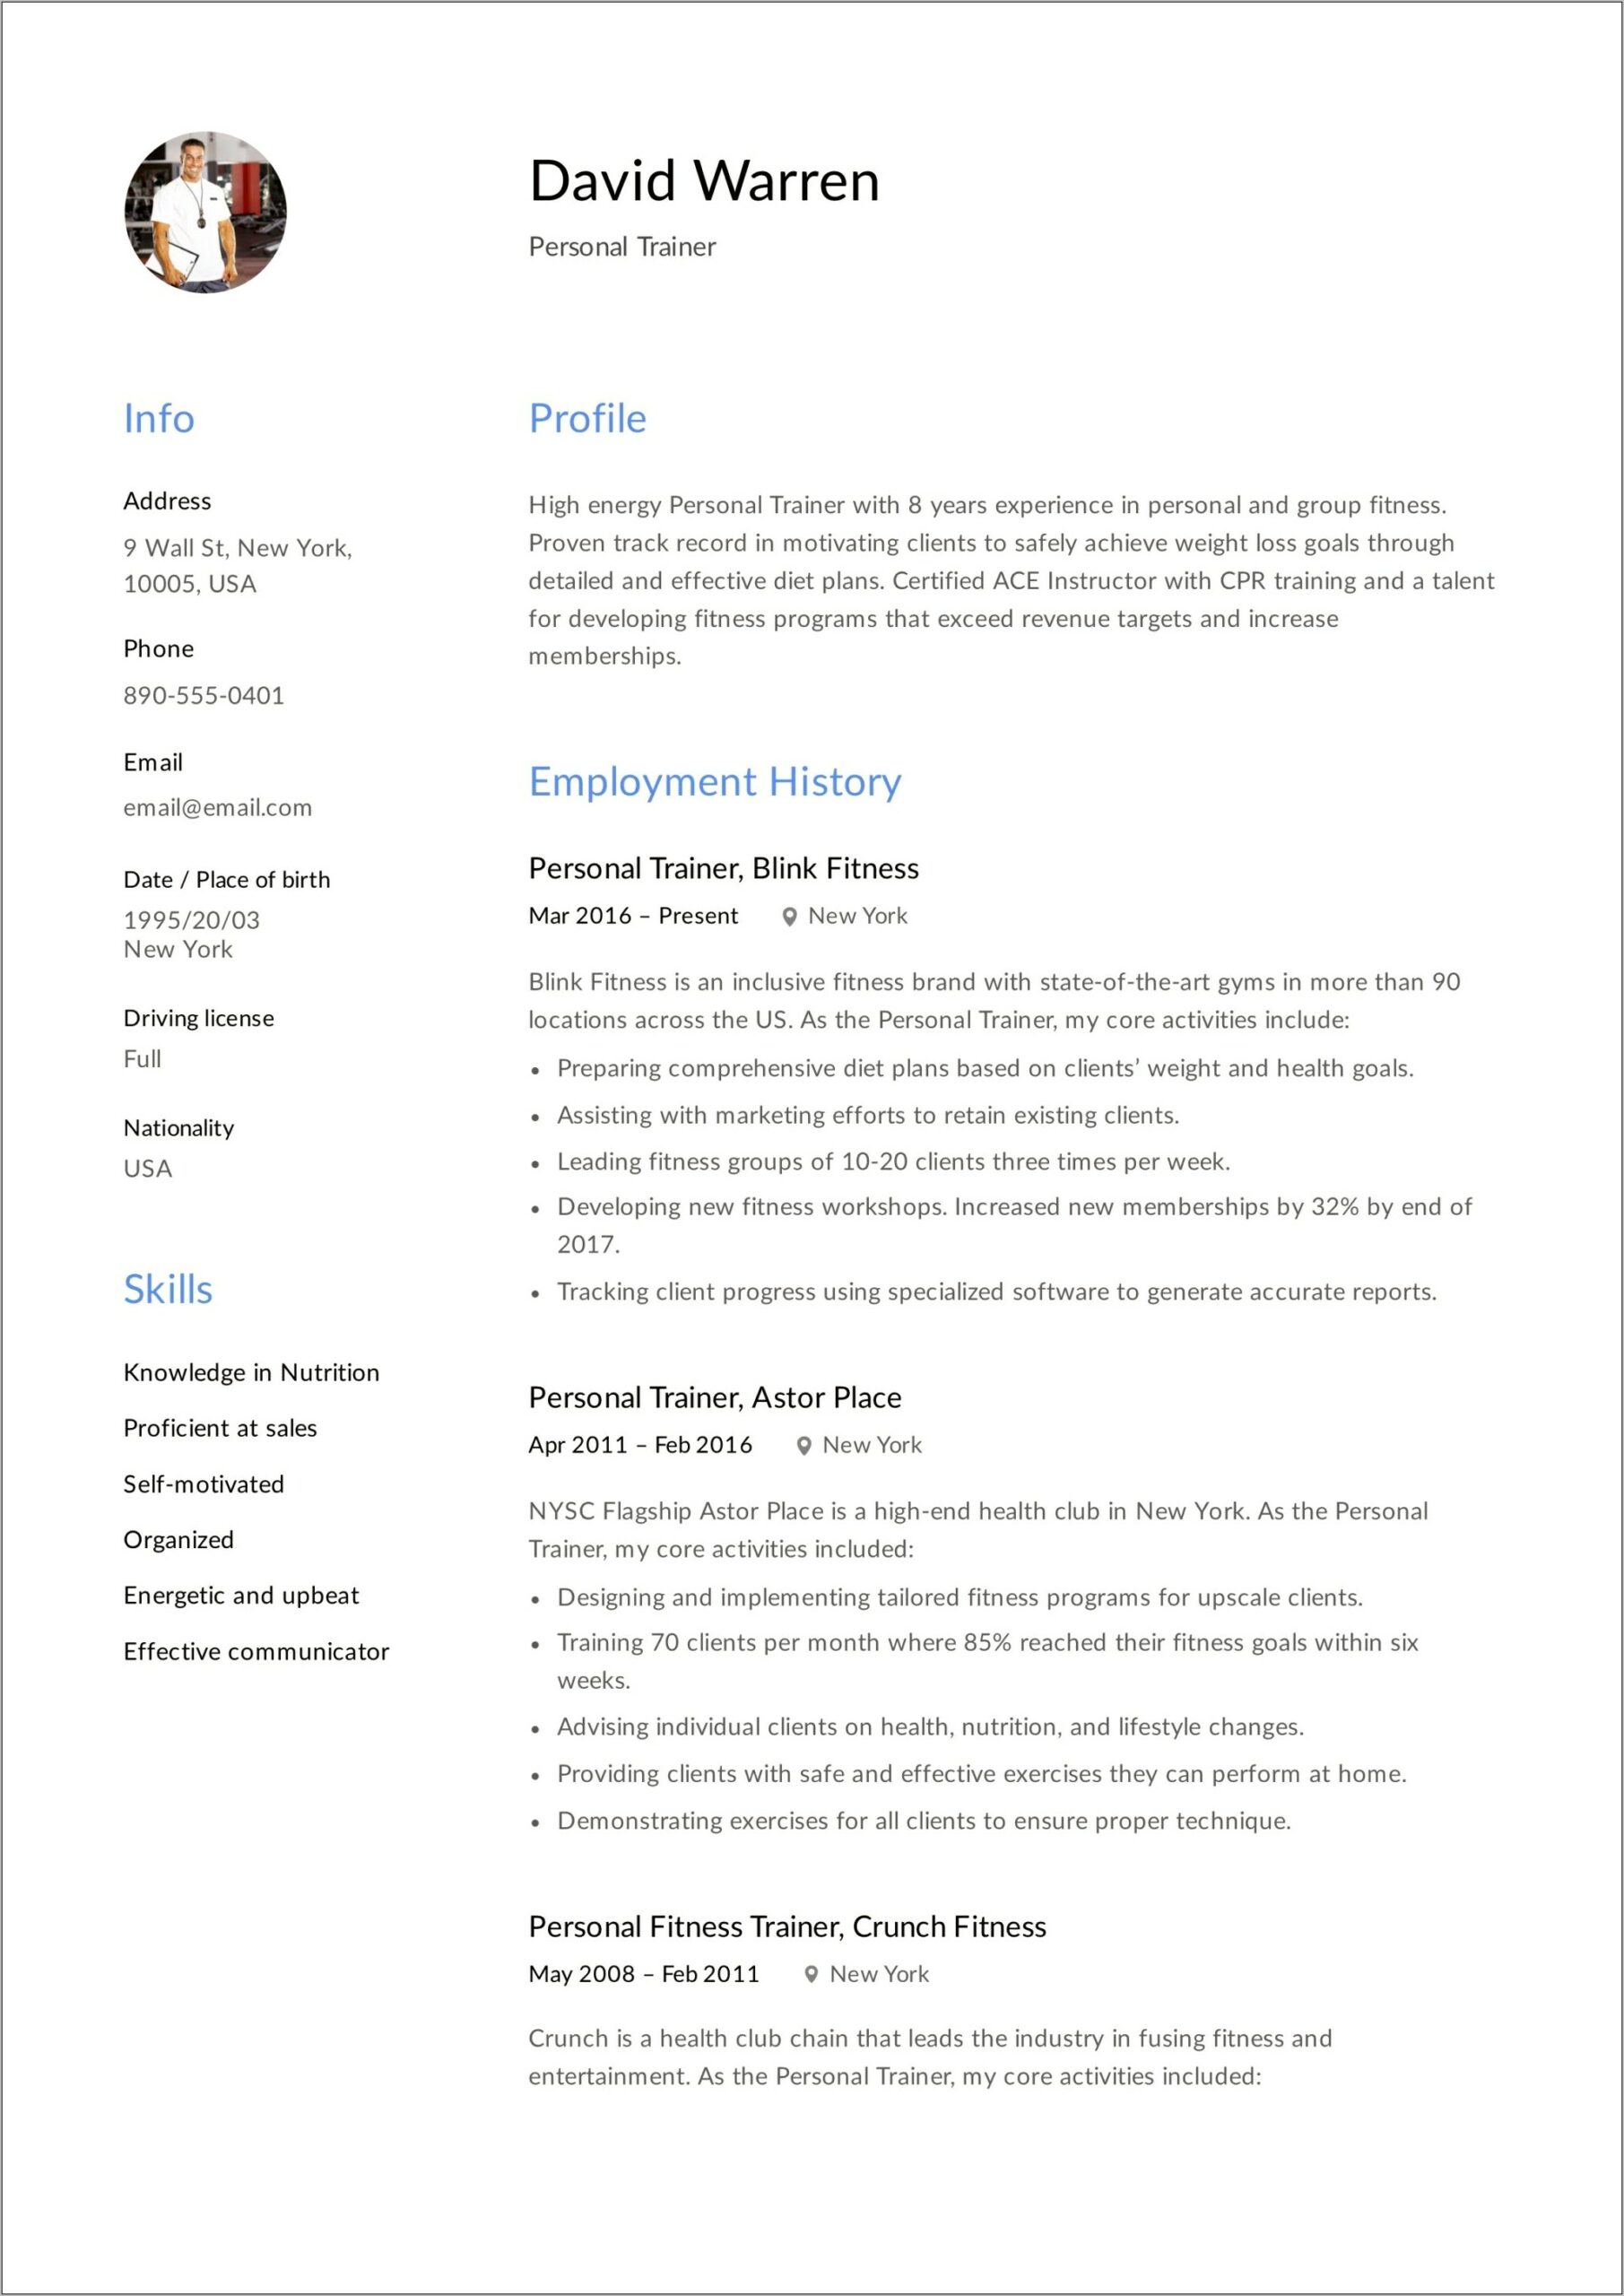 Personal Training Resume Objective Examples